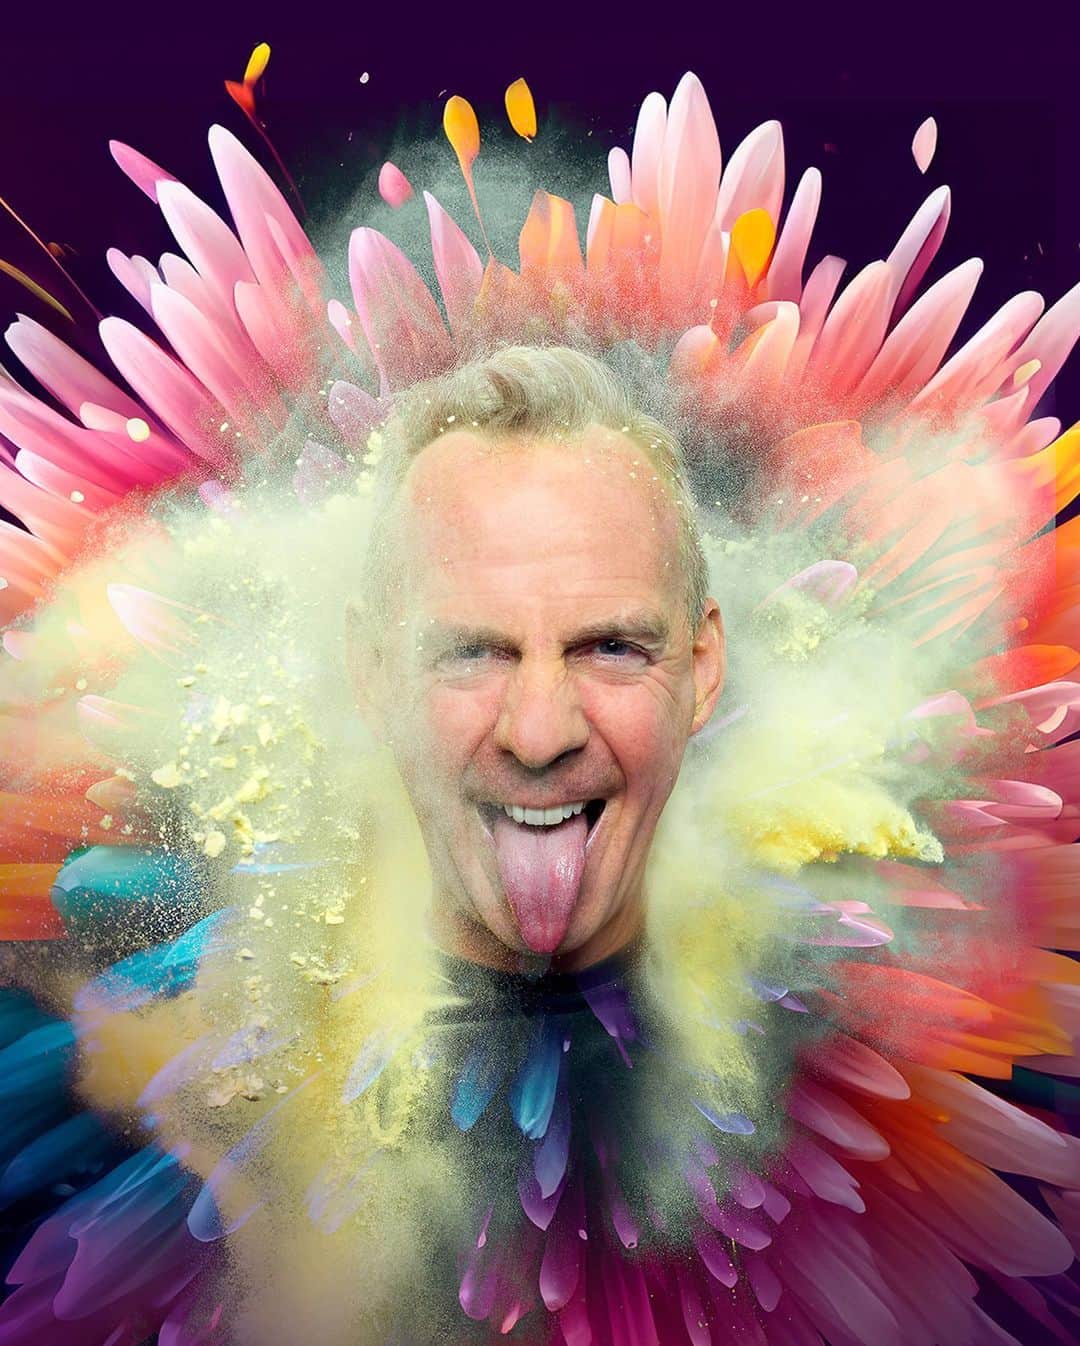 FatboySlimのインスタグラム：「Get ready for a summer of LOVE in 2024.  Tickets go on sale this Friday 3rd Nov LINK IN BIO Fatboy Slim Loves…  June 14th - Fairview Park, Dublin  June 15th - Eden Sessions, Cornwall July 5th - Castlefield Bowl, Manchester July 6th - Open Air Theatre, Scarborough July 7th - Tofte Manor, Bedfordshire July 20th - SWG3 Galvanizers Yard, Glasgow Aug 9th - Galway Airport, Galway Aug 24th -The Piece Hall, Halifax  #FatboySlimLoves」